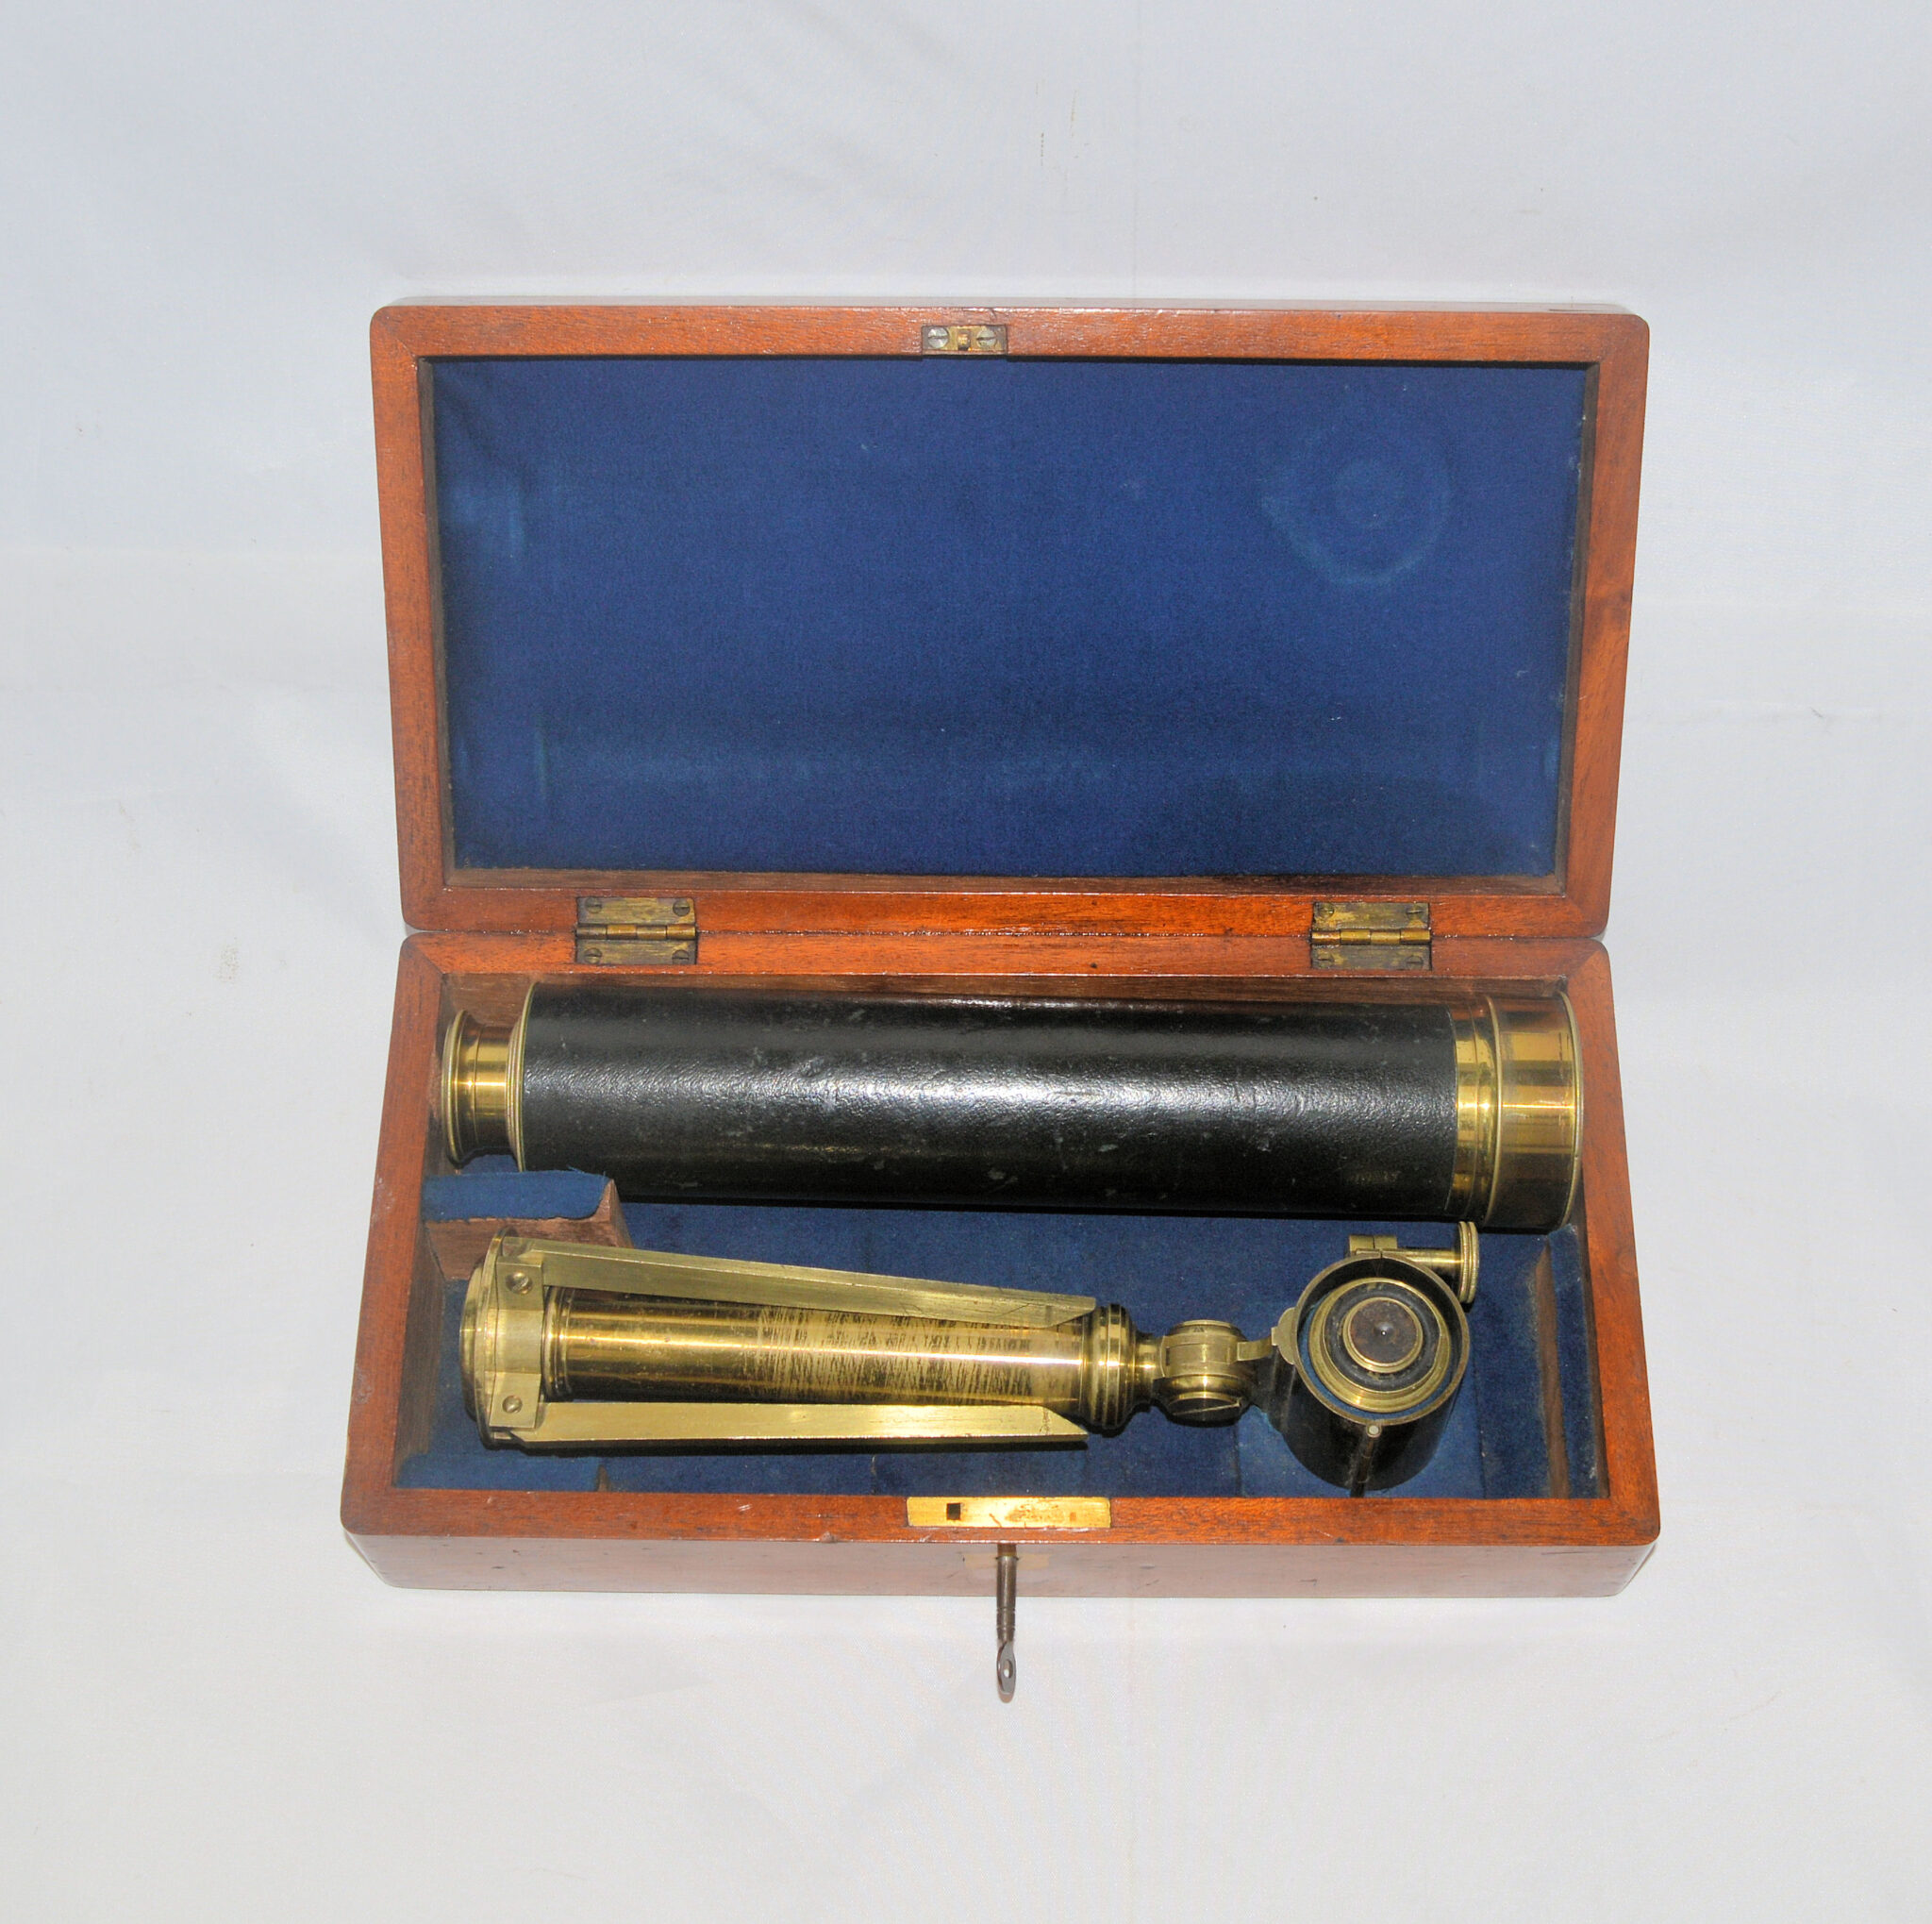 Four draw portable telescope with stand and case – Bullock, Macclesfield.